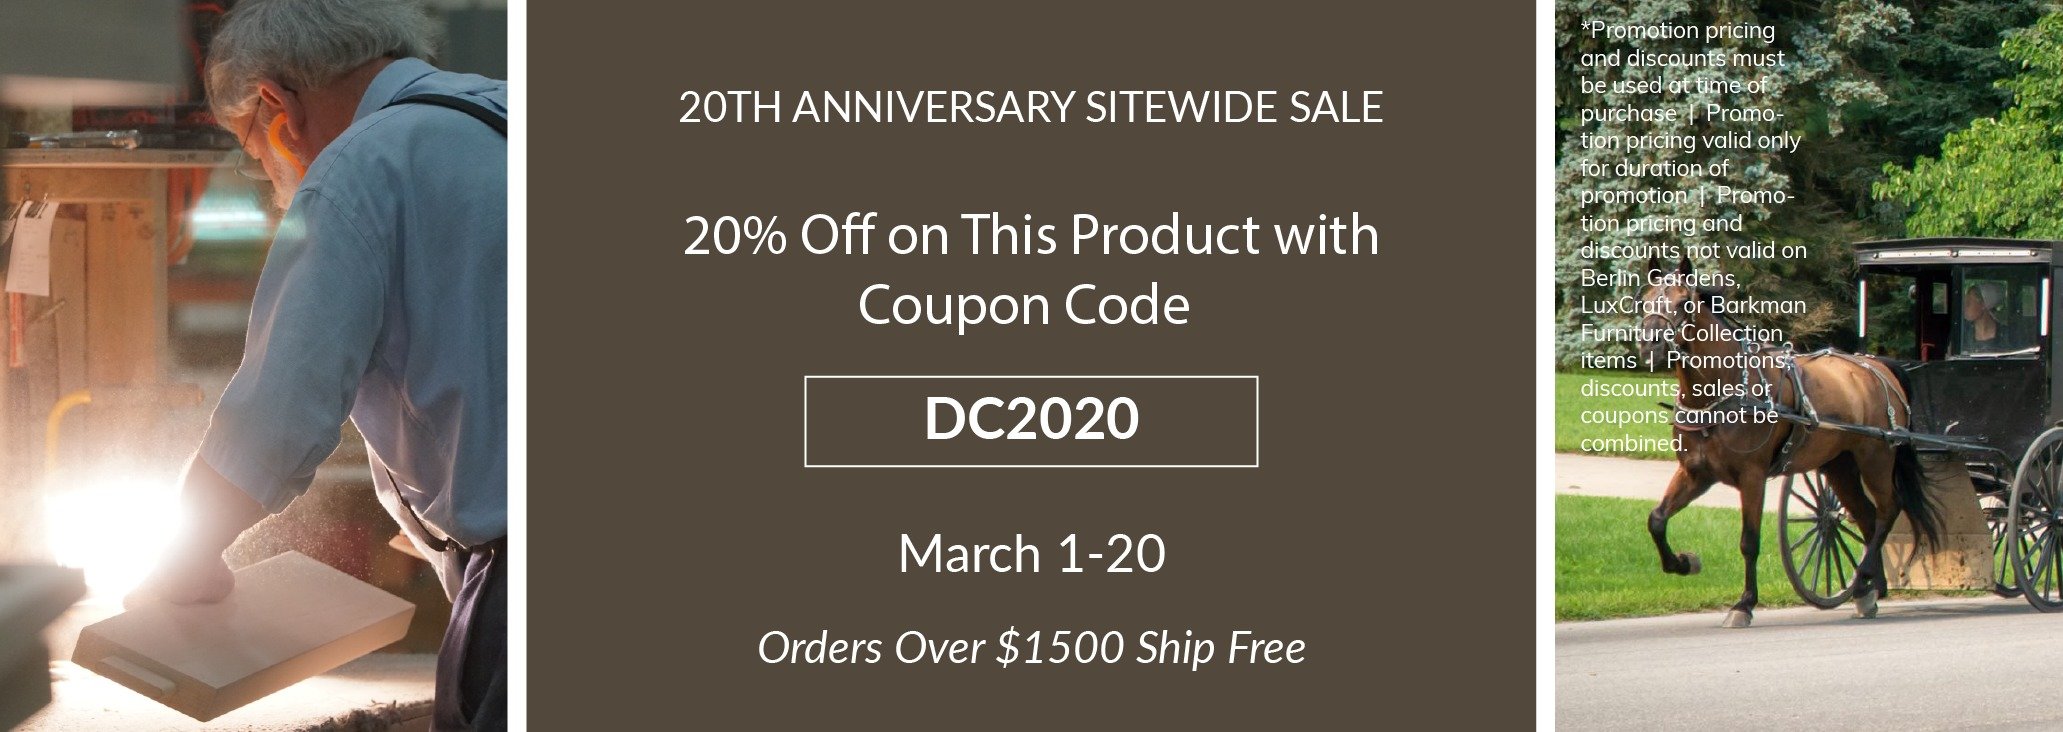 20th Anniversary Sitewide Sale